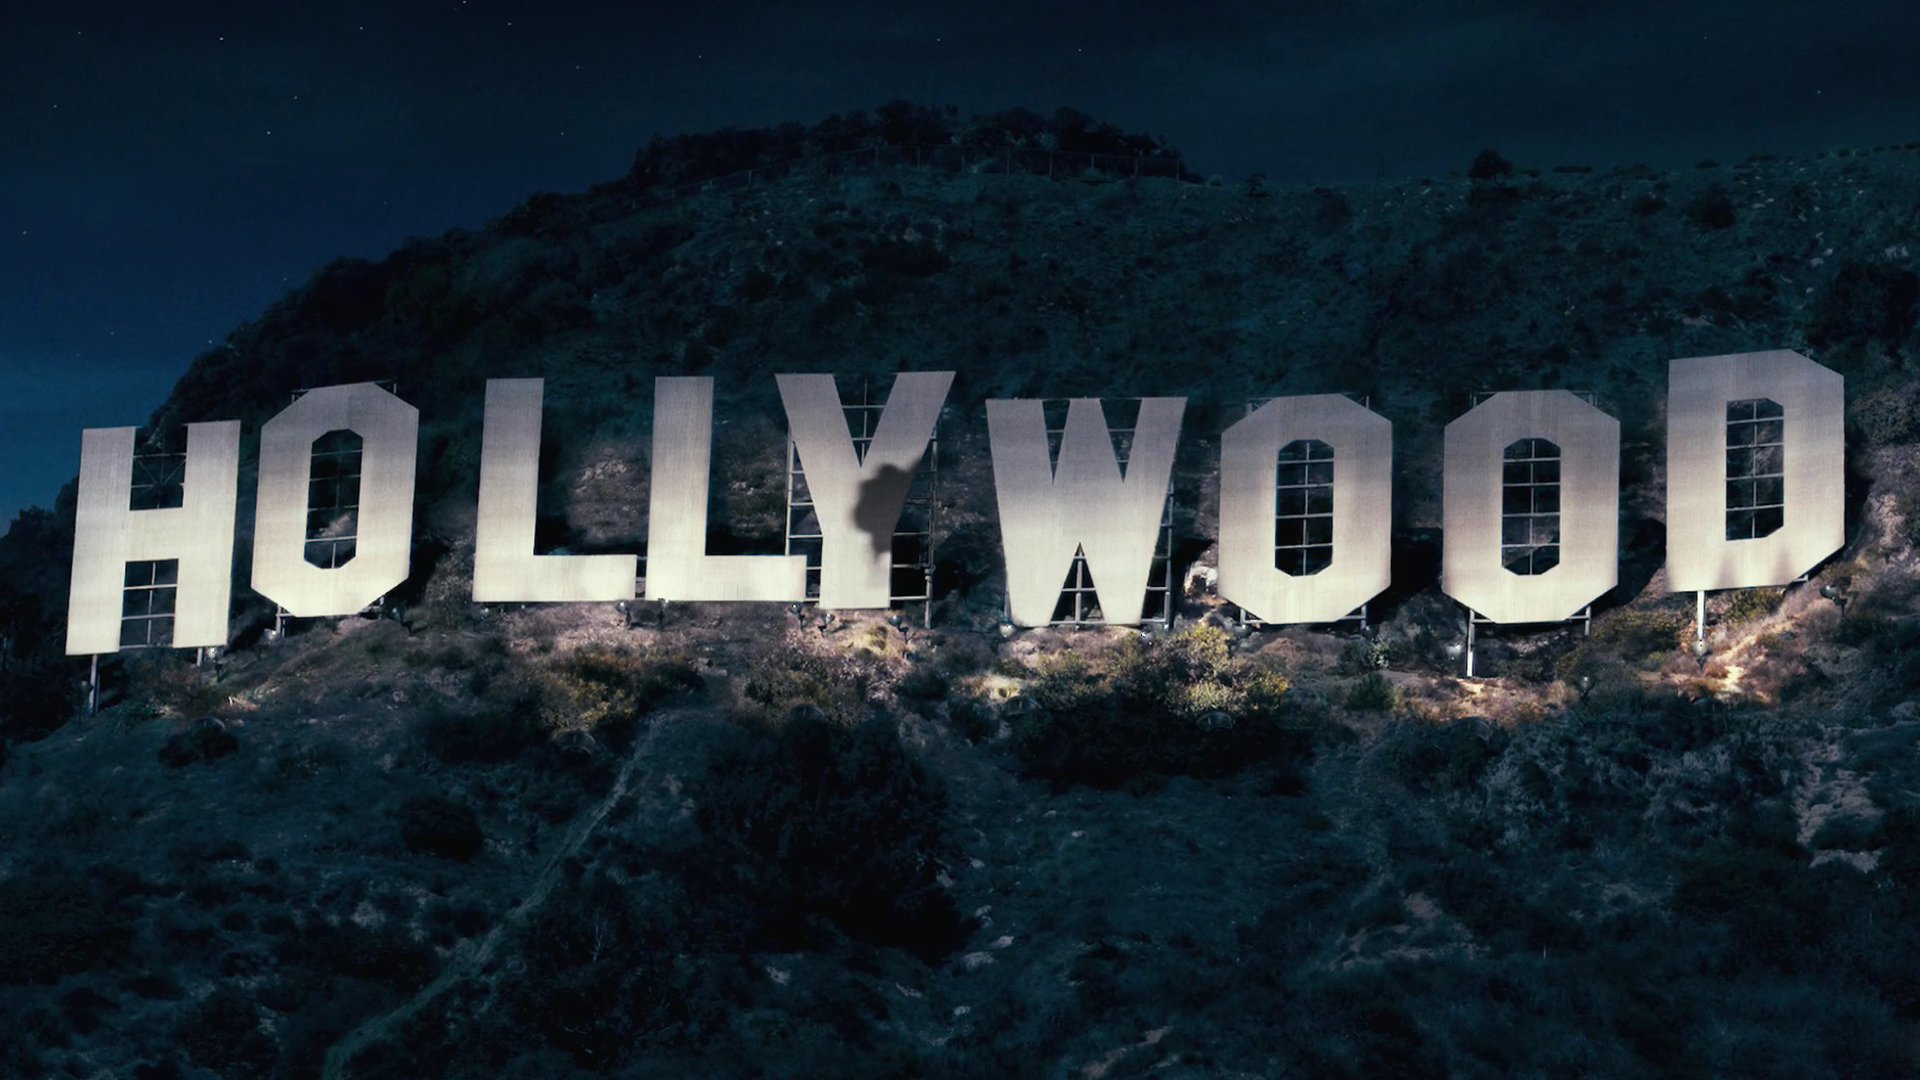 Hollywood sign in Hop wallpaper   549053 1920x1080